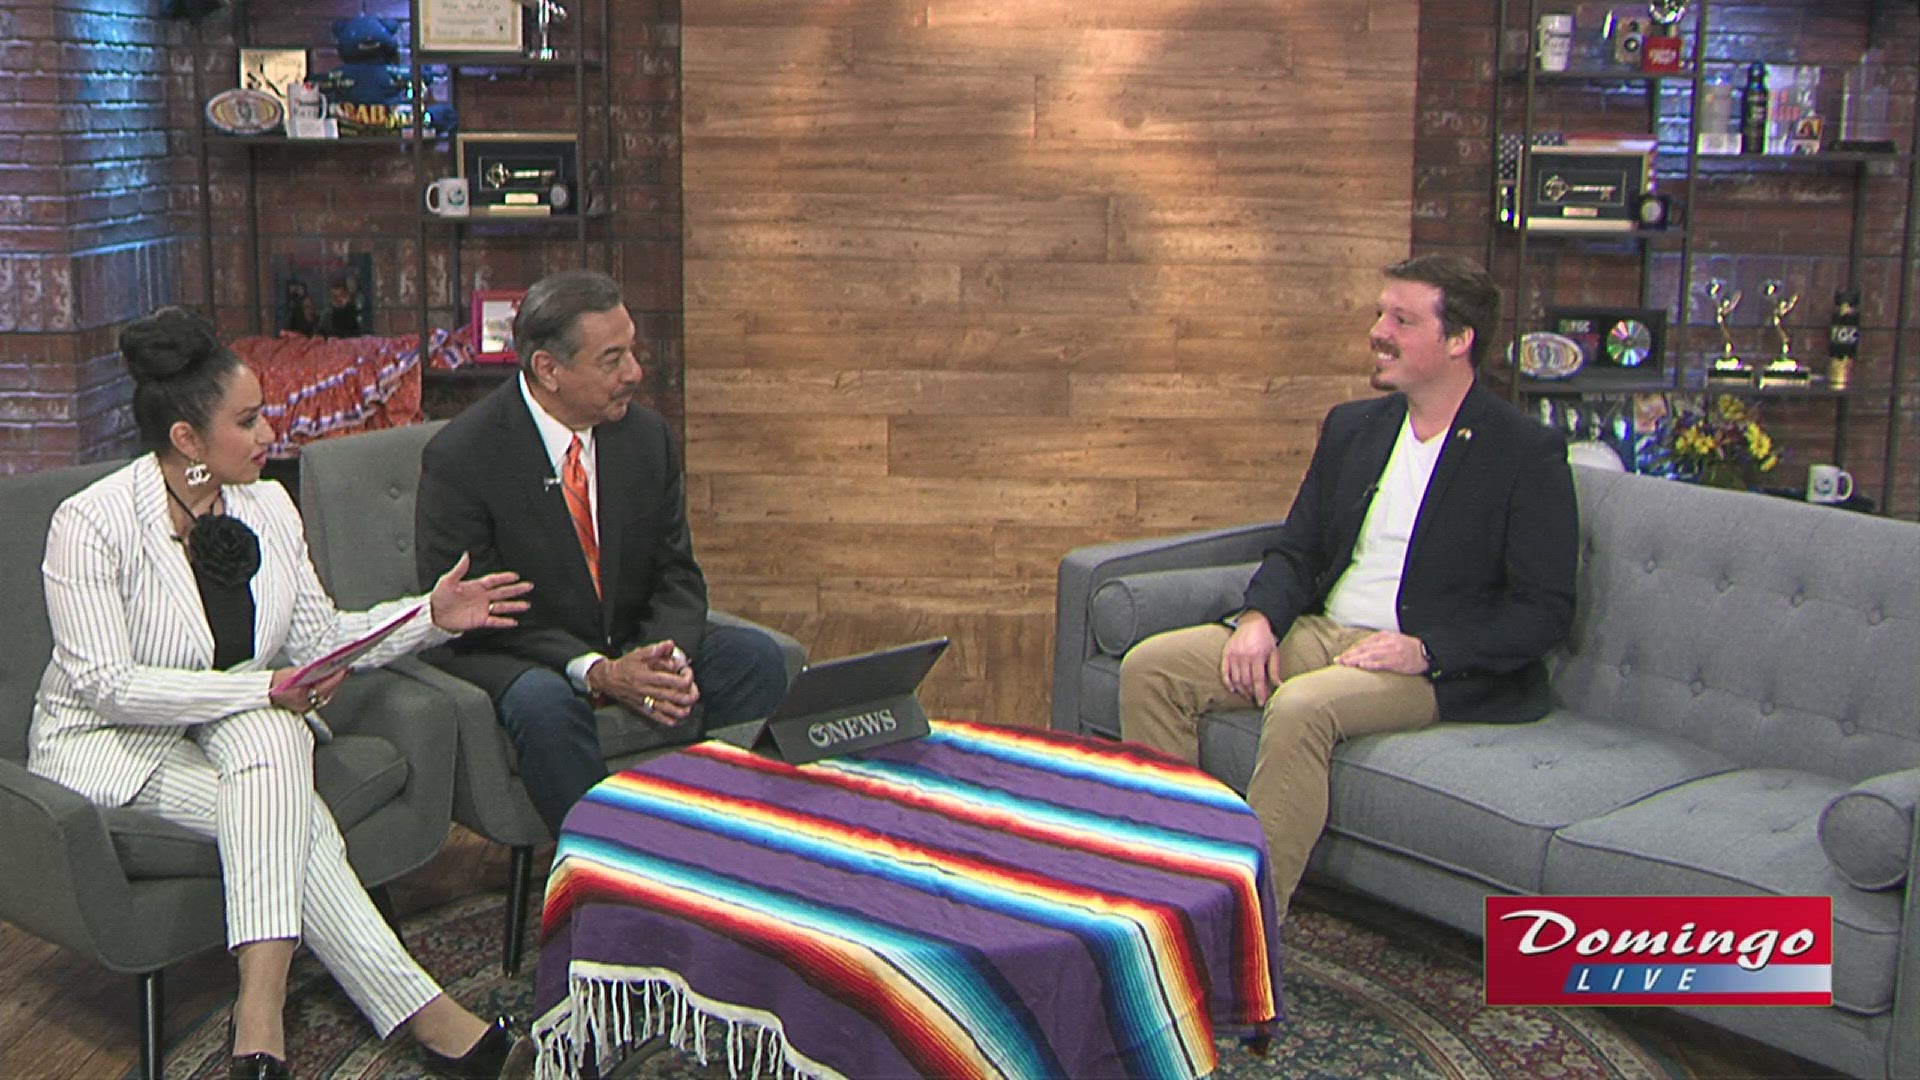 Coastal Bend Pride Center Assistant Director and VP of Pride CC Robert Kymes shares details of upcoming events and how we can support the local LGBTQ+ community.